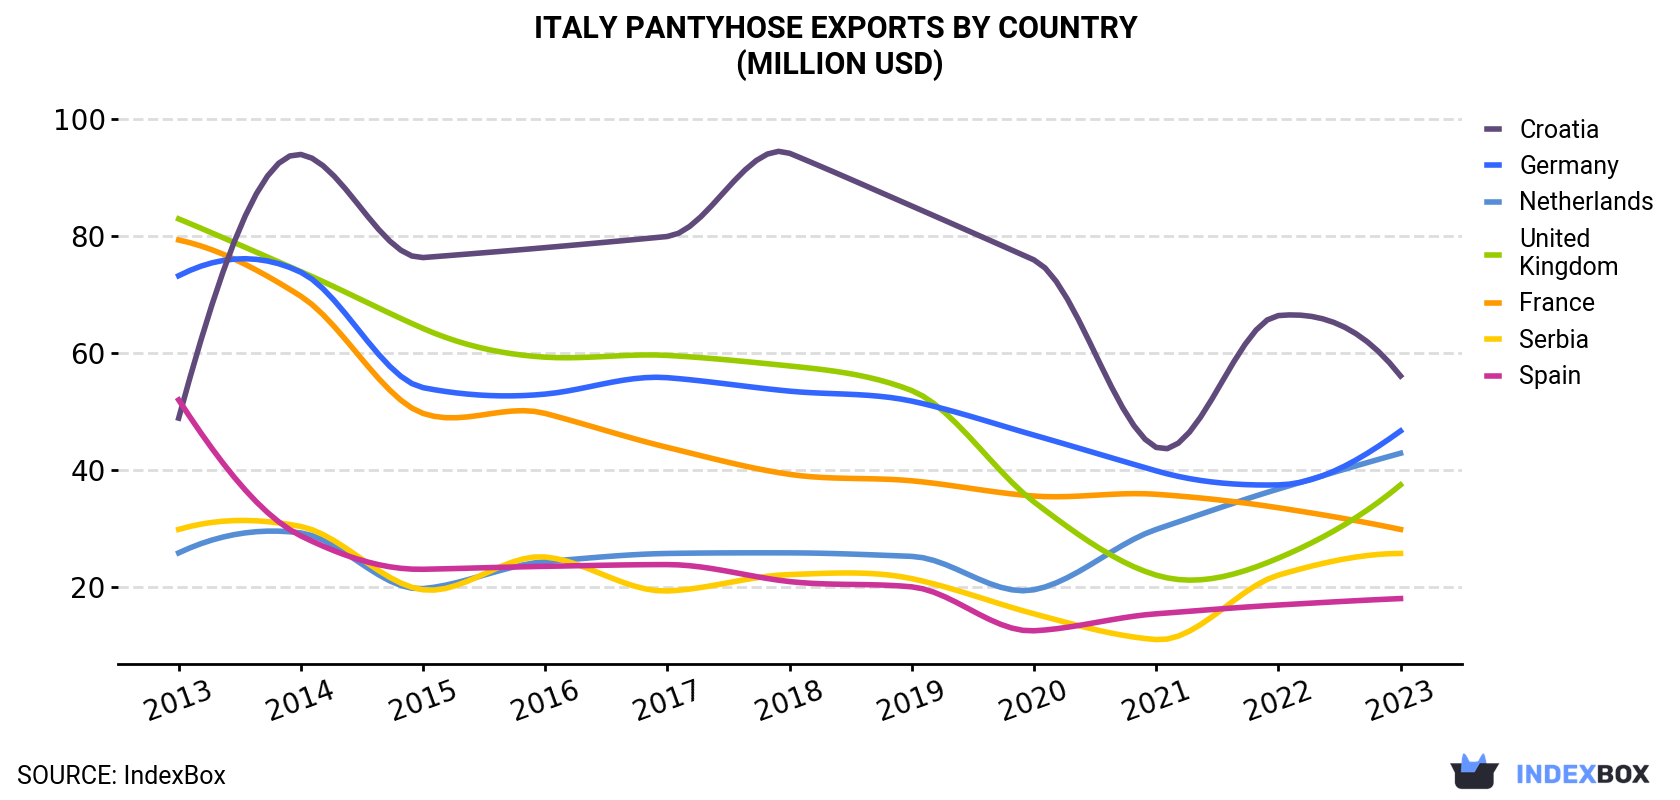 Italy Pantyhose Exports By Country (Million USD)